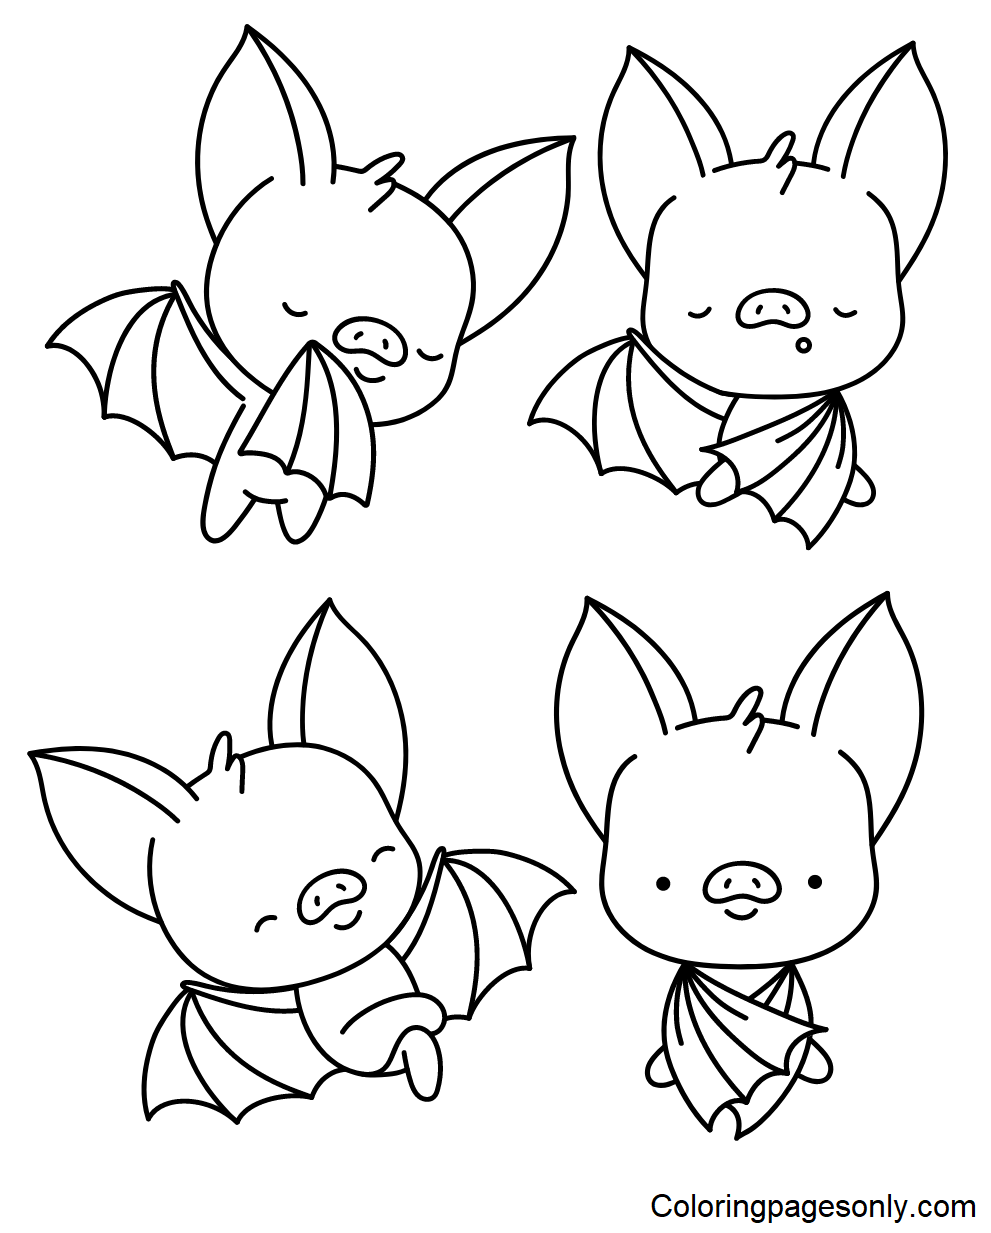 Four Bats for Kids Coloring Page